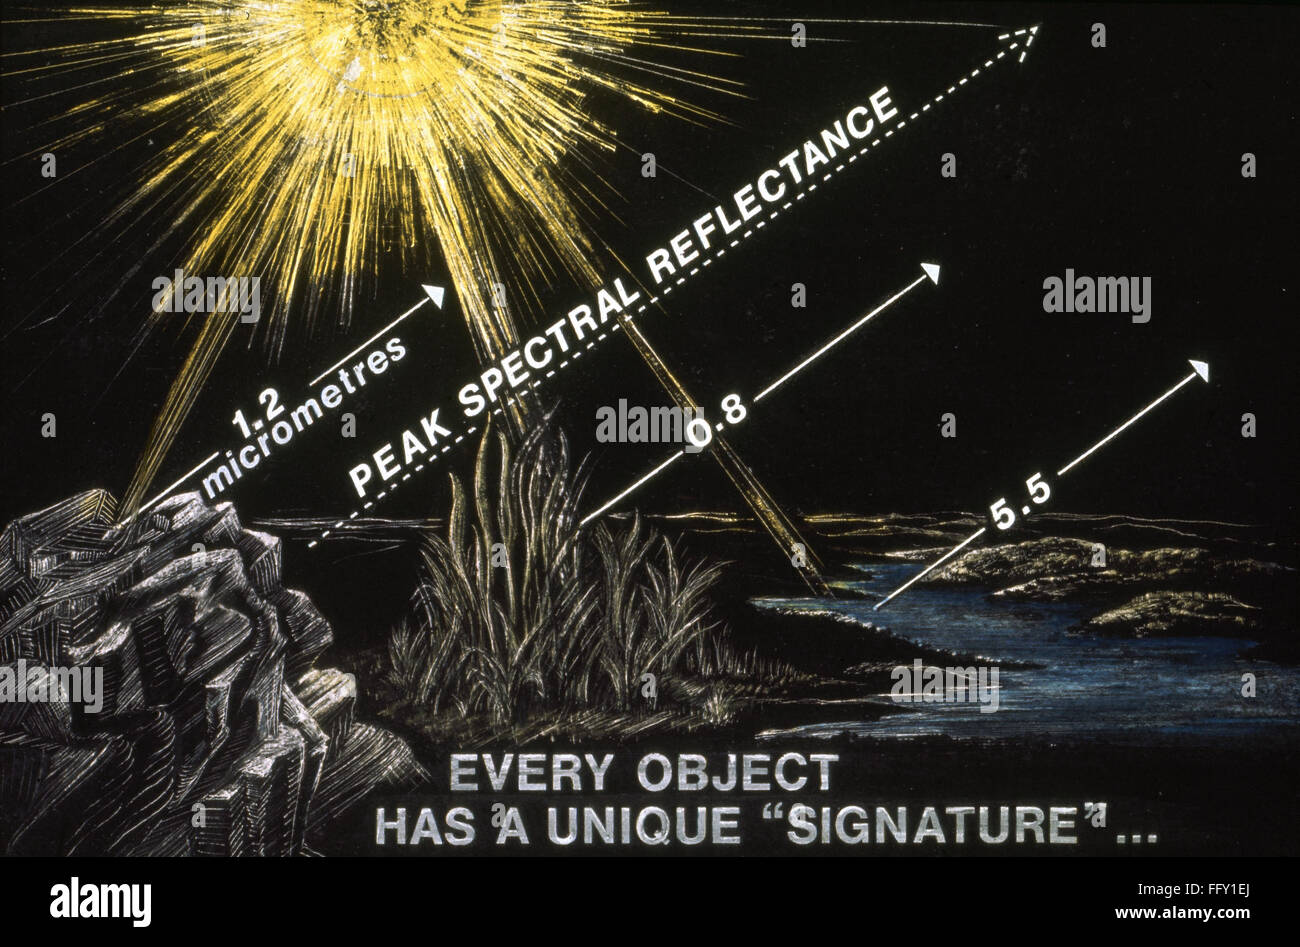 SPECTRAL REFLECTIVITY. /nChart illustrating how different objects reflect different values of light, c1970. Stock Photo